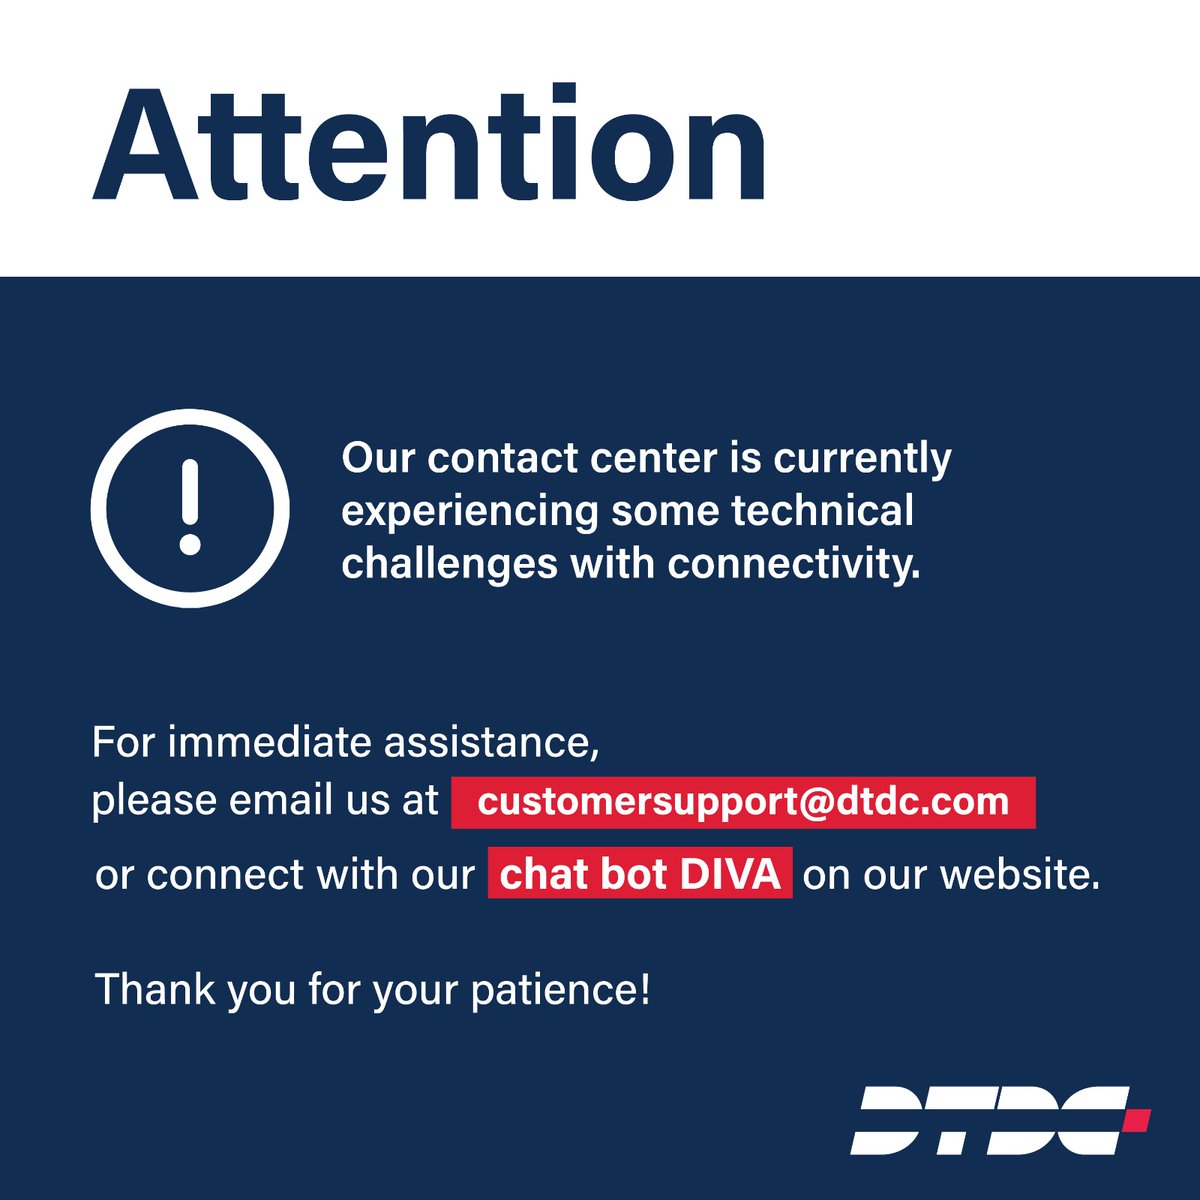 Connect with us via email at customersupport@dtdc.com or the chat bot DIVA on our website dtdc.in Thank you for your patience